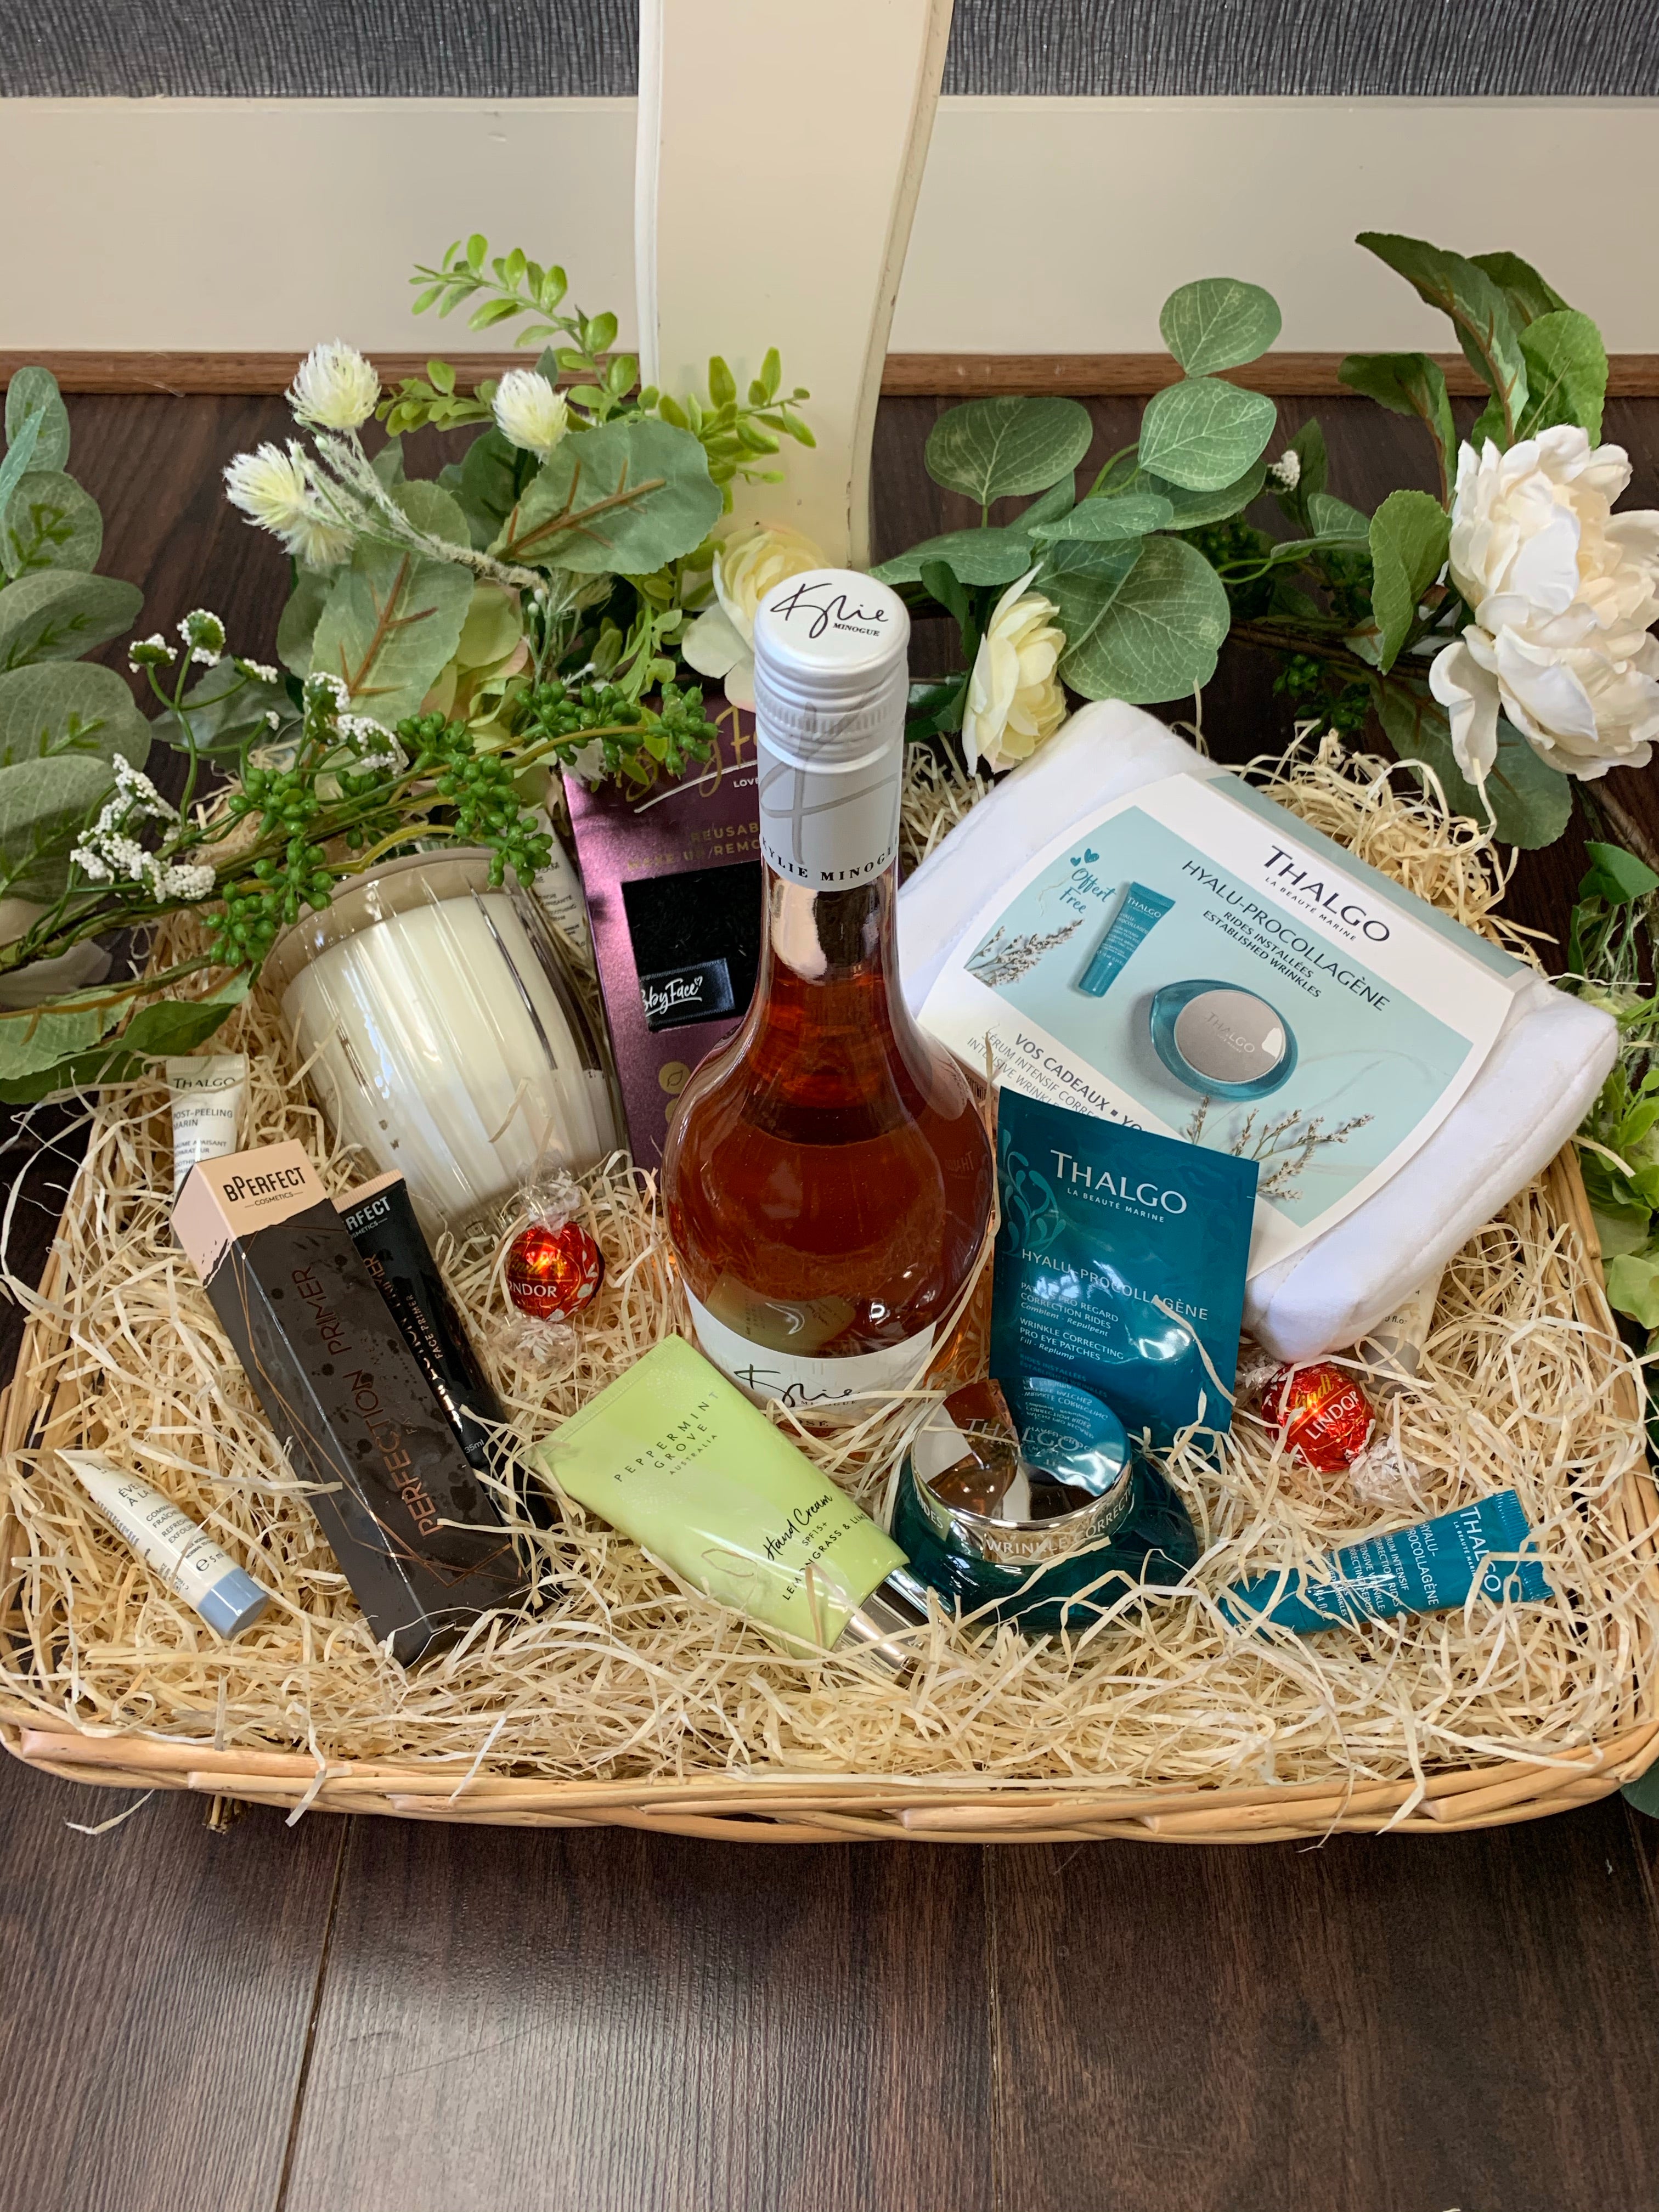 Peppermint grove and Thalgo hamper